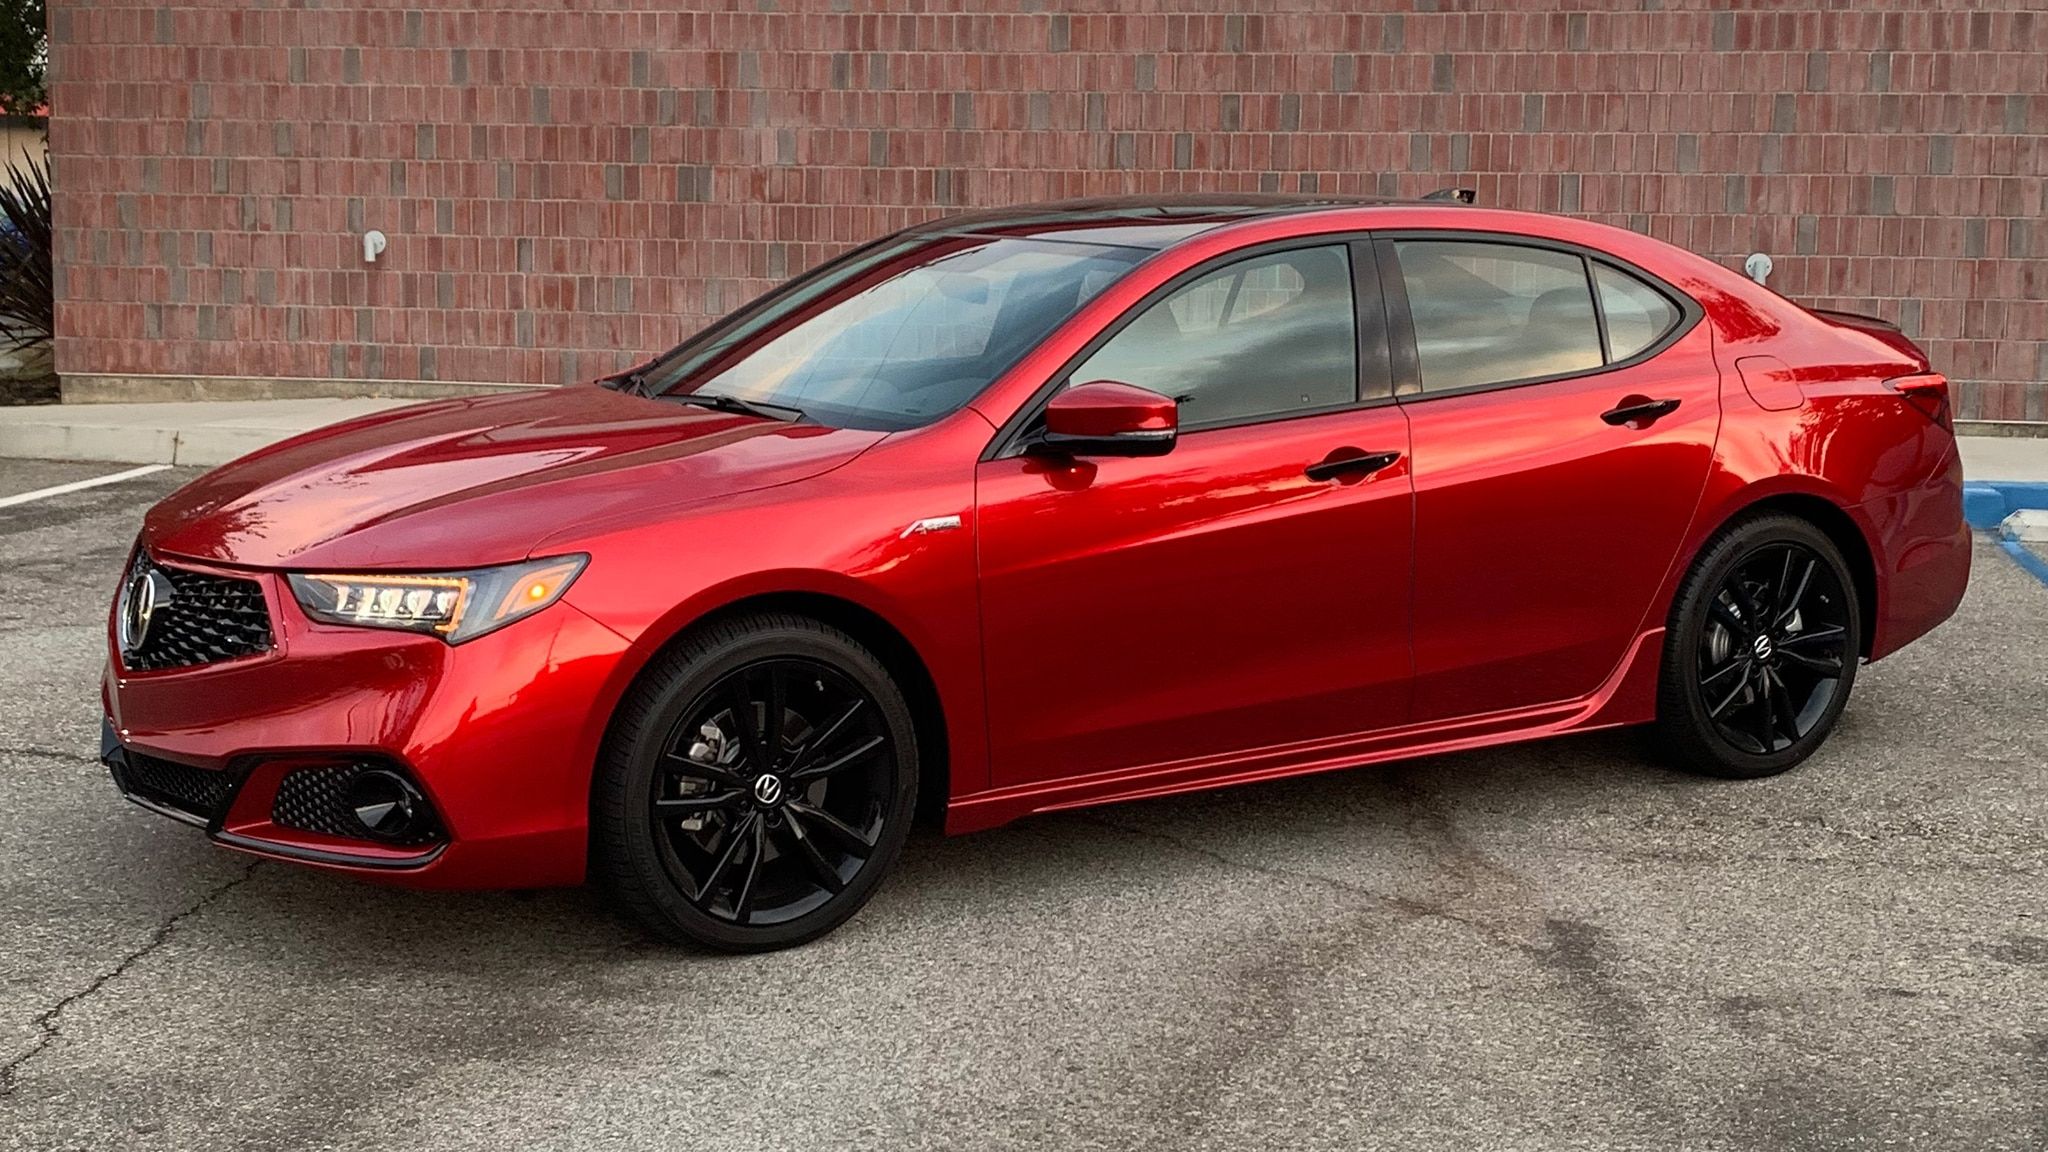 Review: The 2020 Acura TLX PMC Edition Is the Best TLX Yet